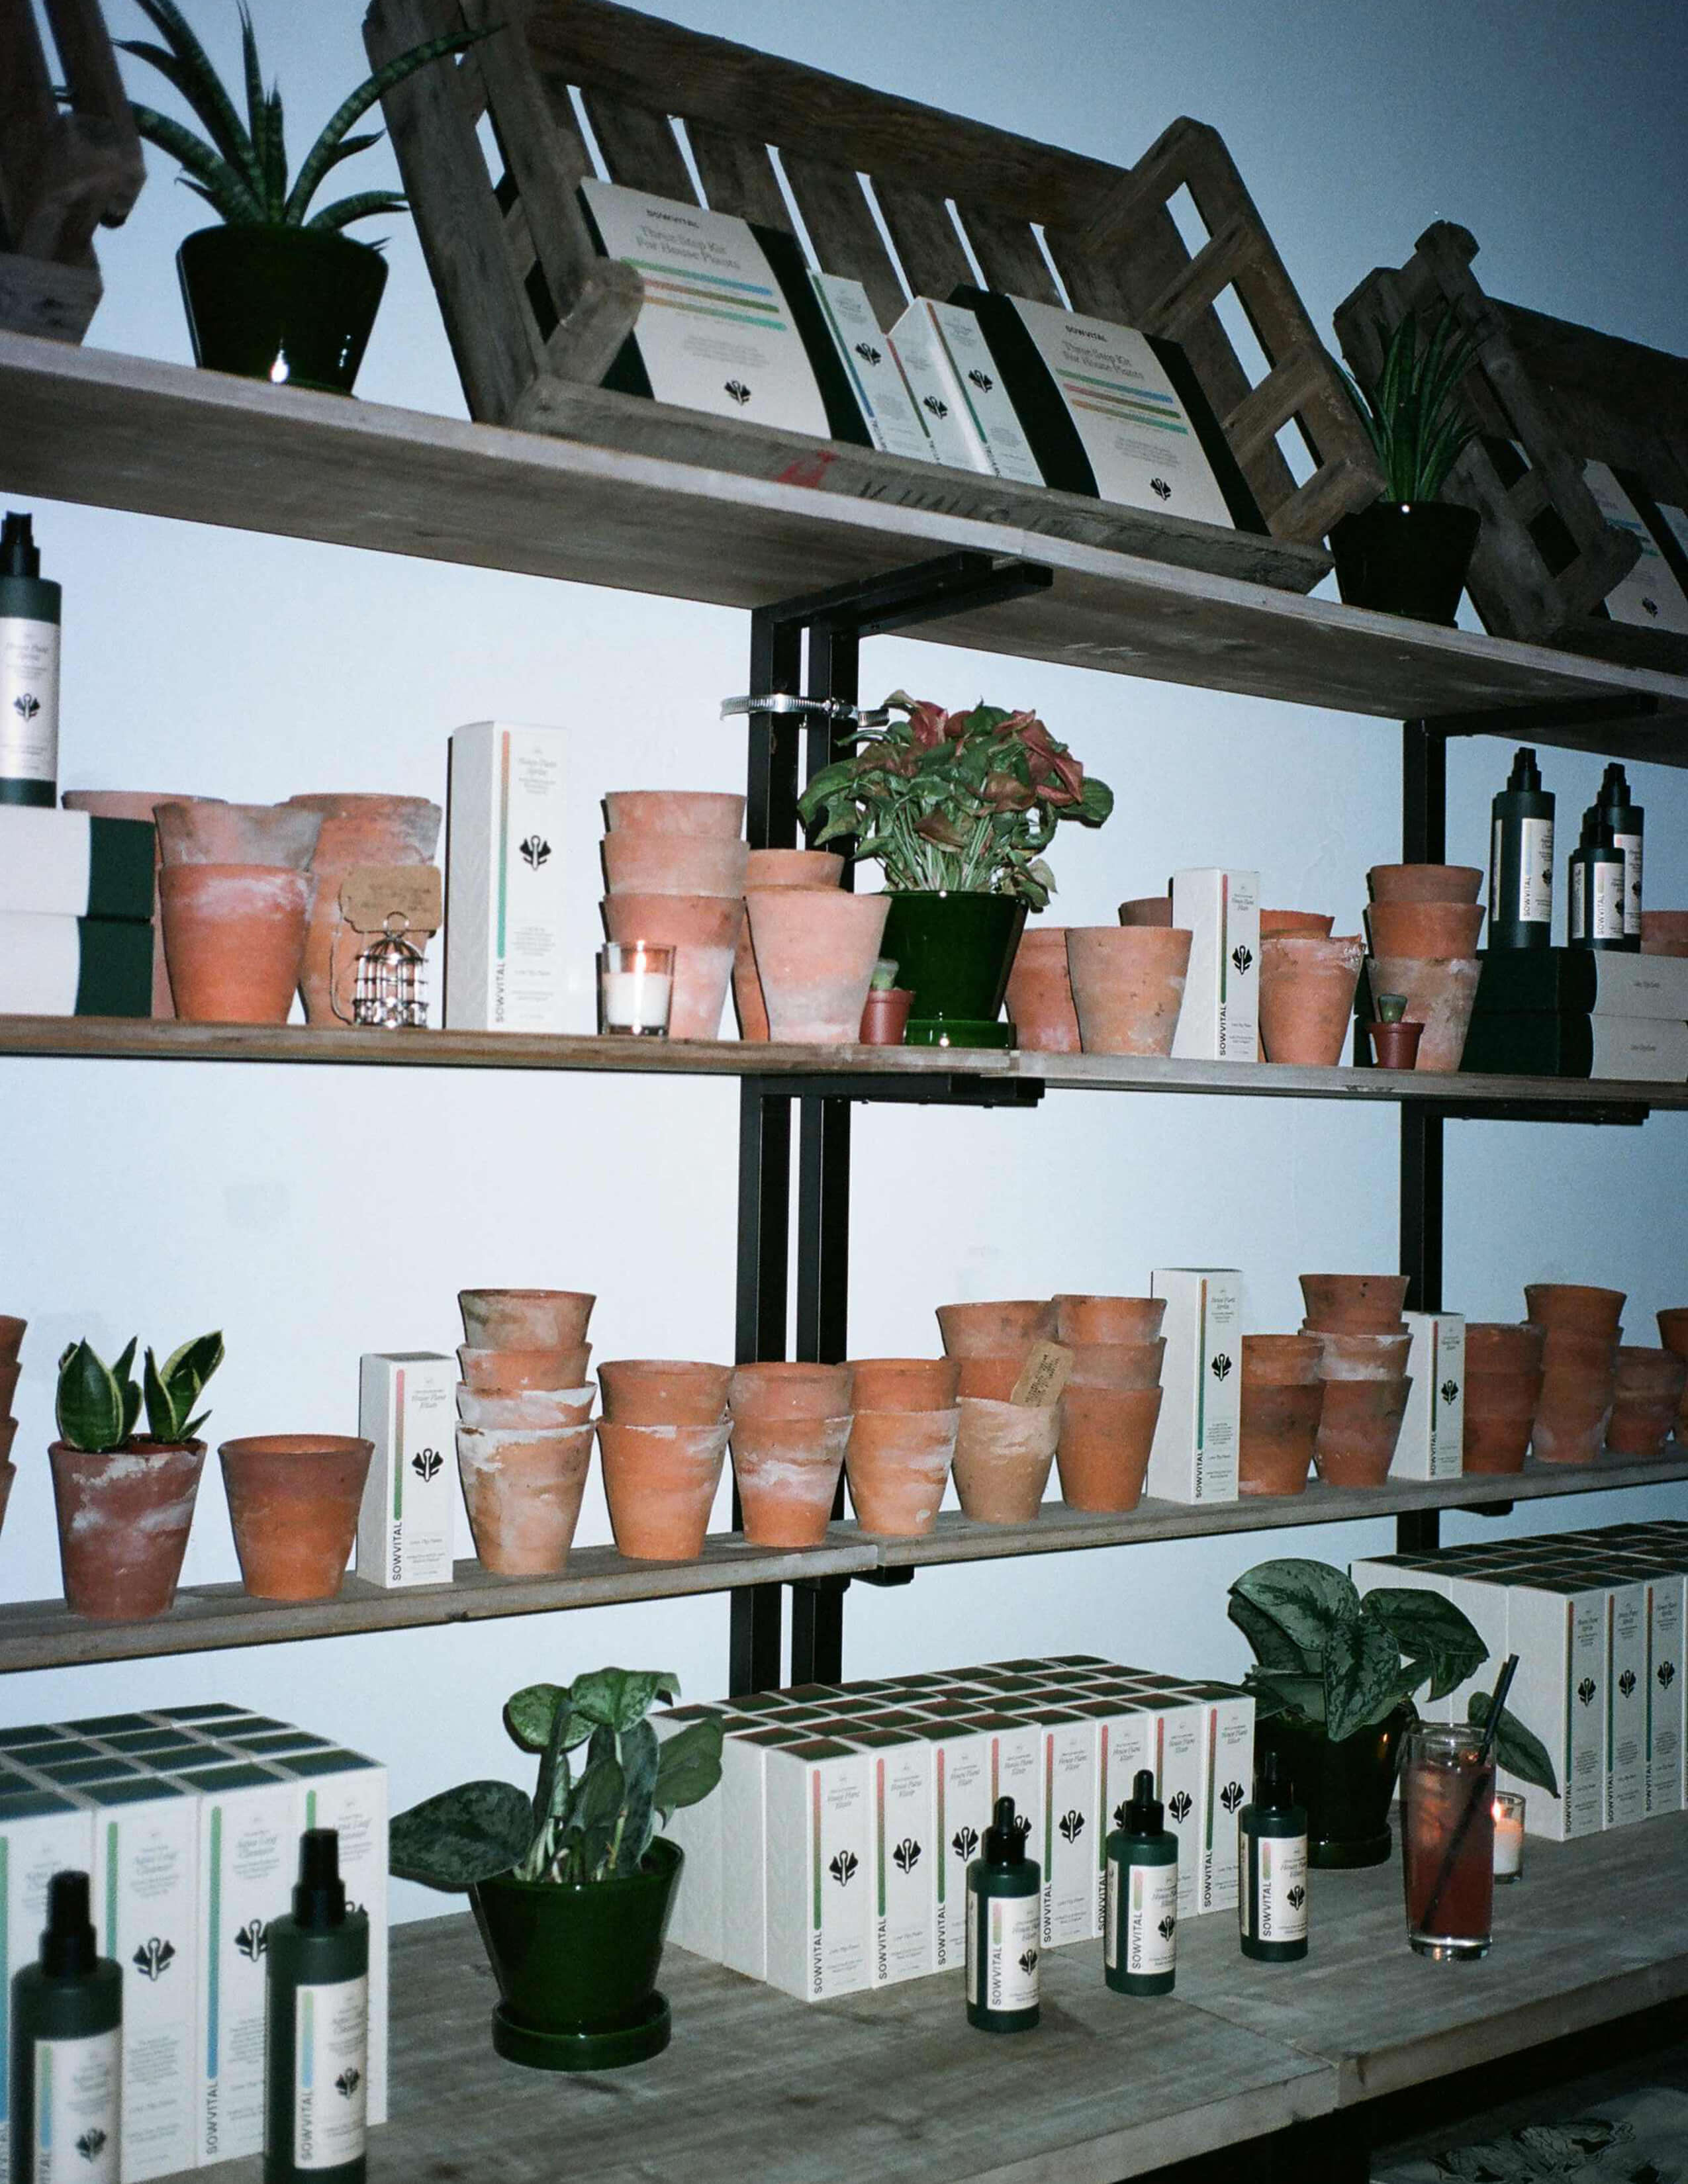 A collection of Sowvital house plant products, with and without packages are displayed with different kinds of plants and terracotta pots on the layered shelf.